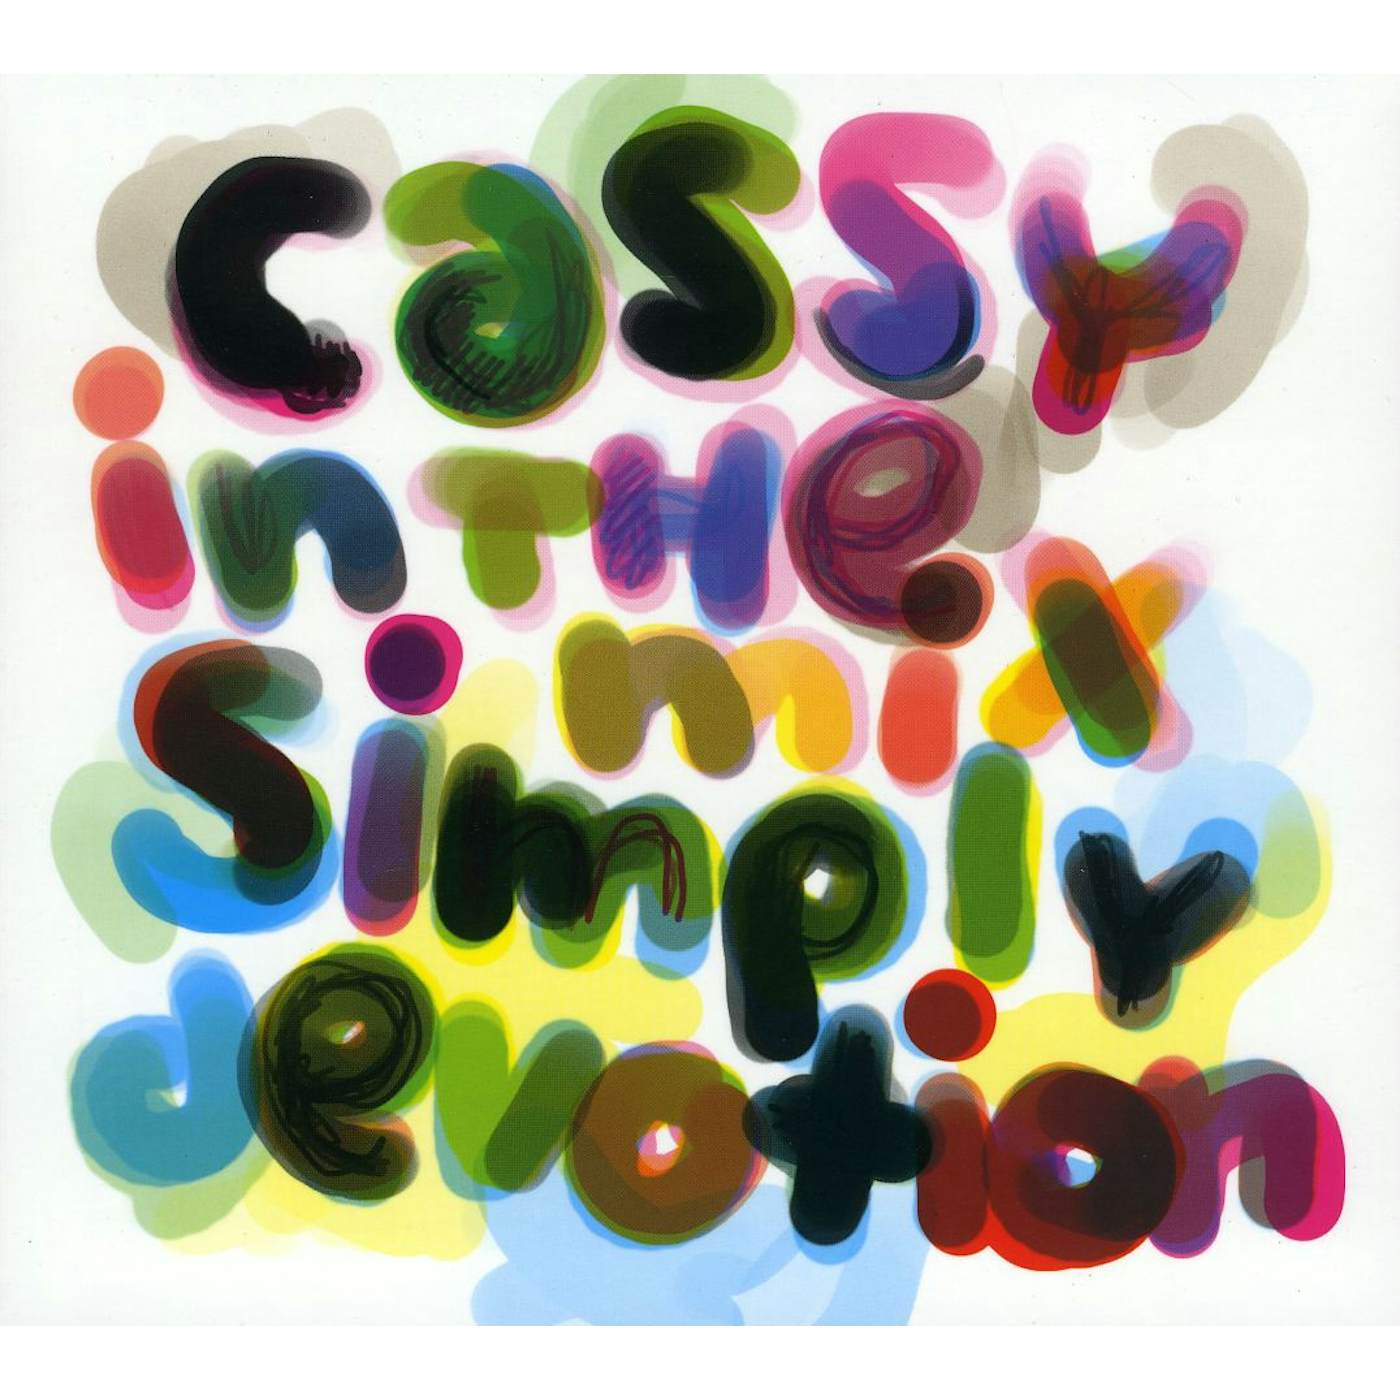 SIMPLY DEVOTION: CASSY IN THE MIX CD